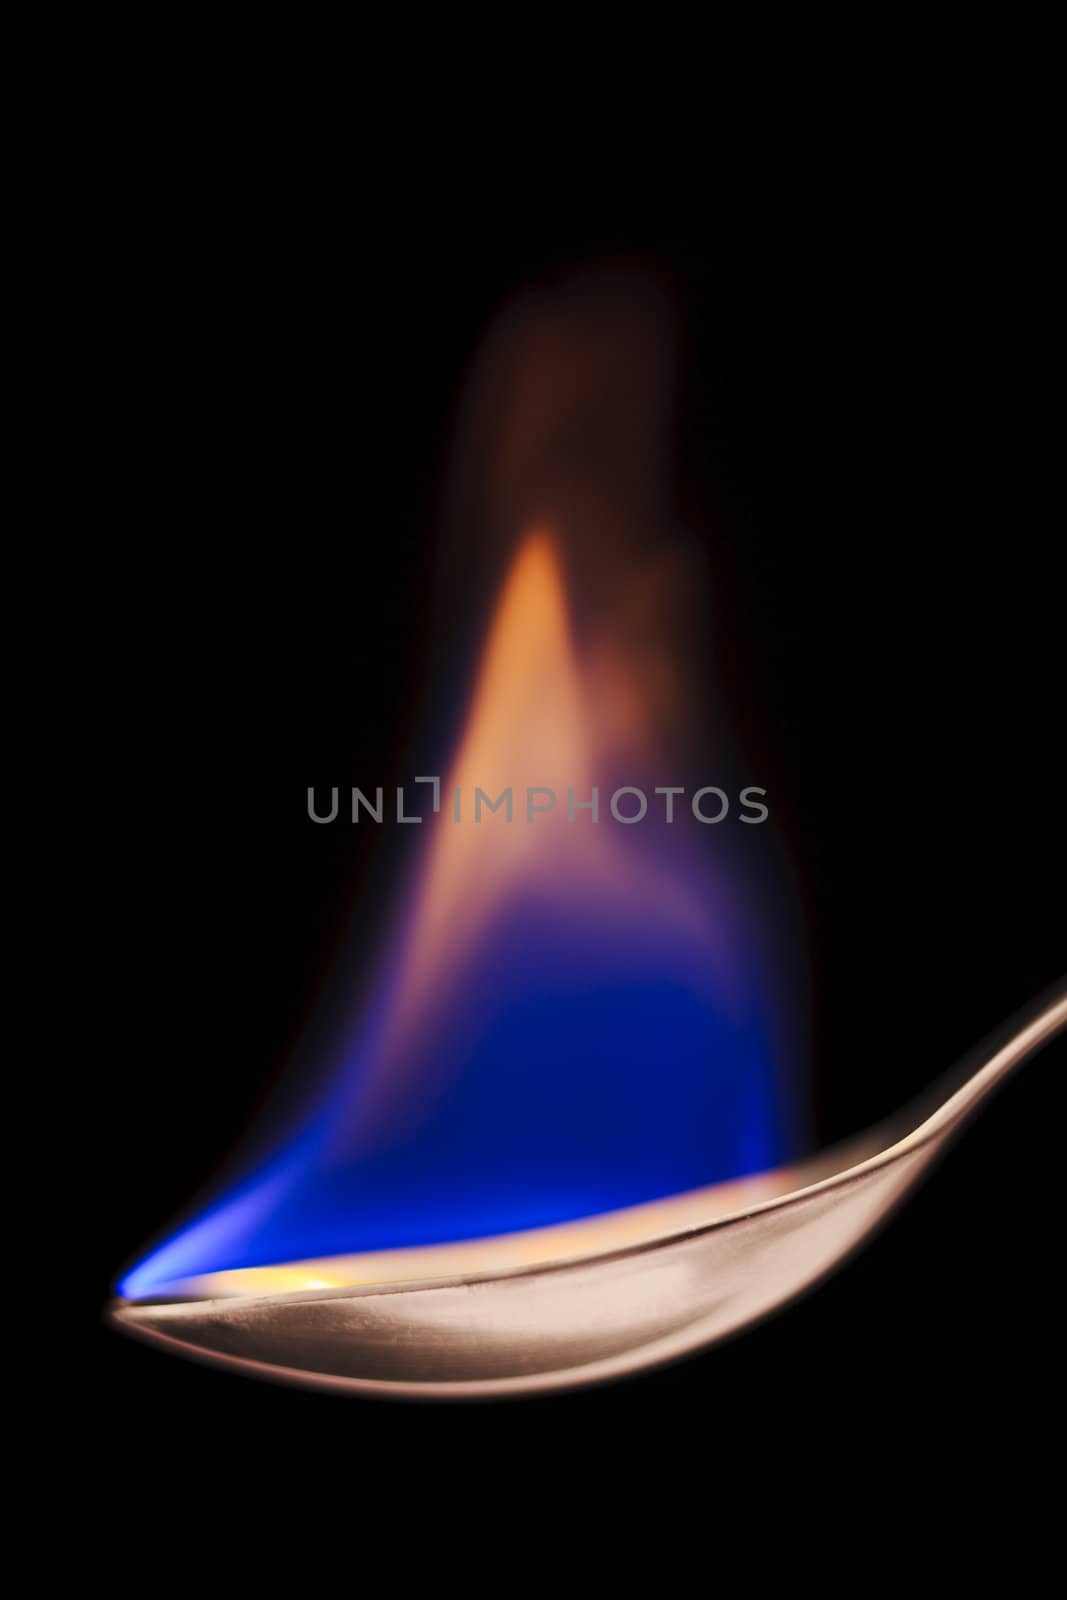 flaming spoon by mjp